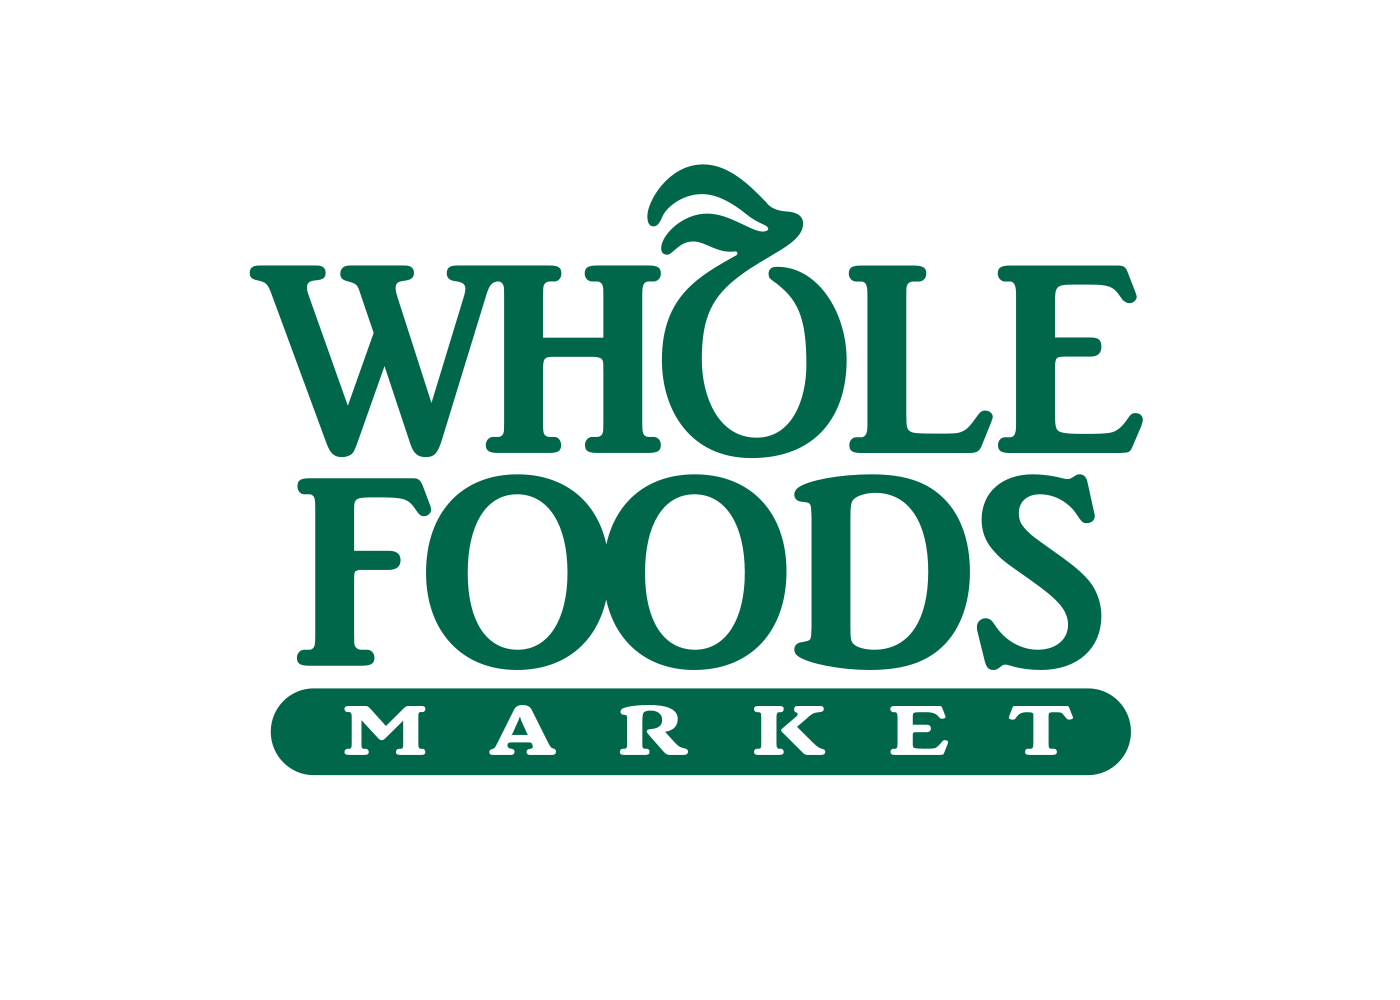 Whole foods Delivery Service